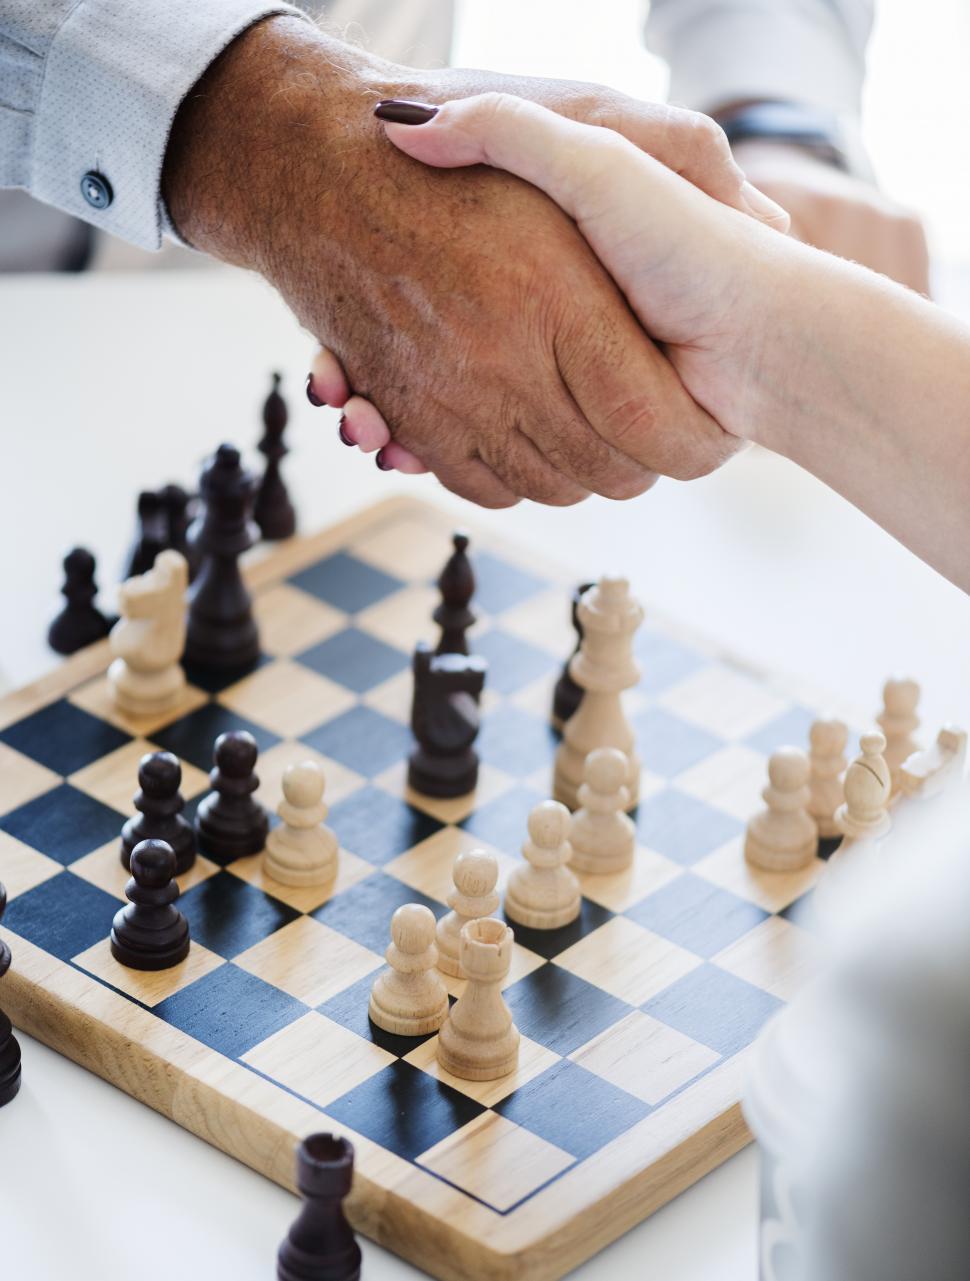 Free Image of Close up of a handshake over a chessboard after game 